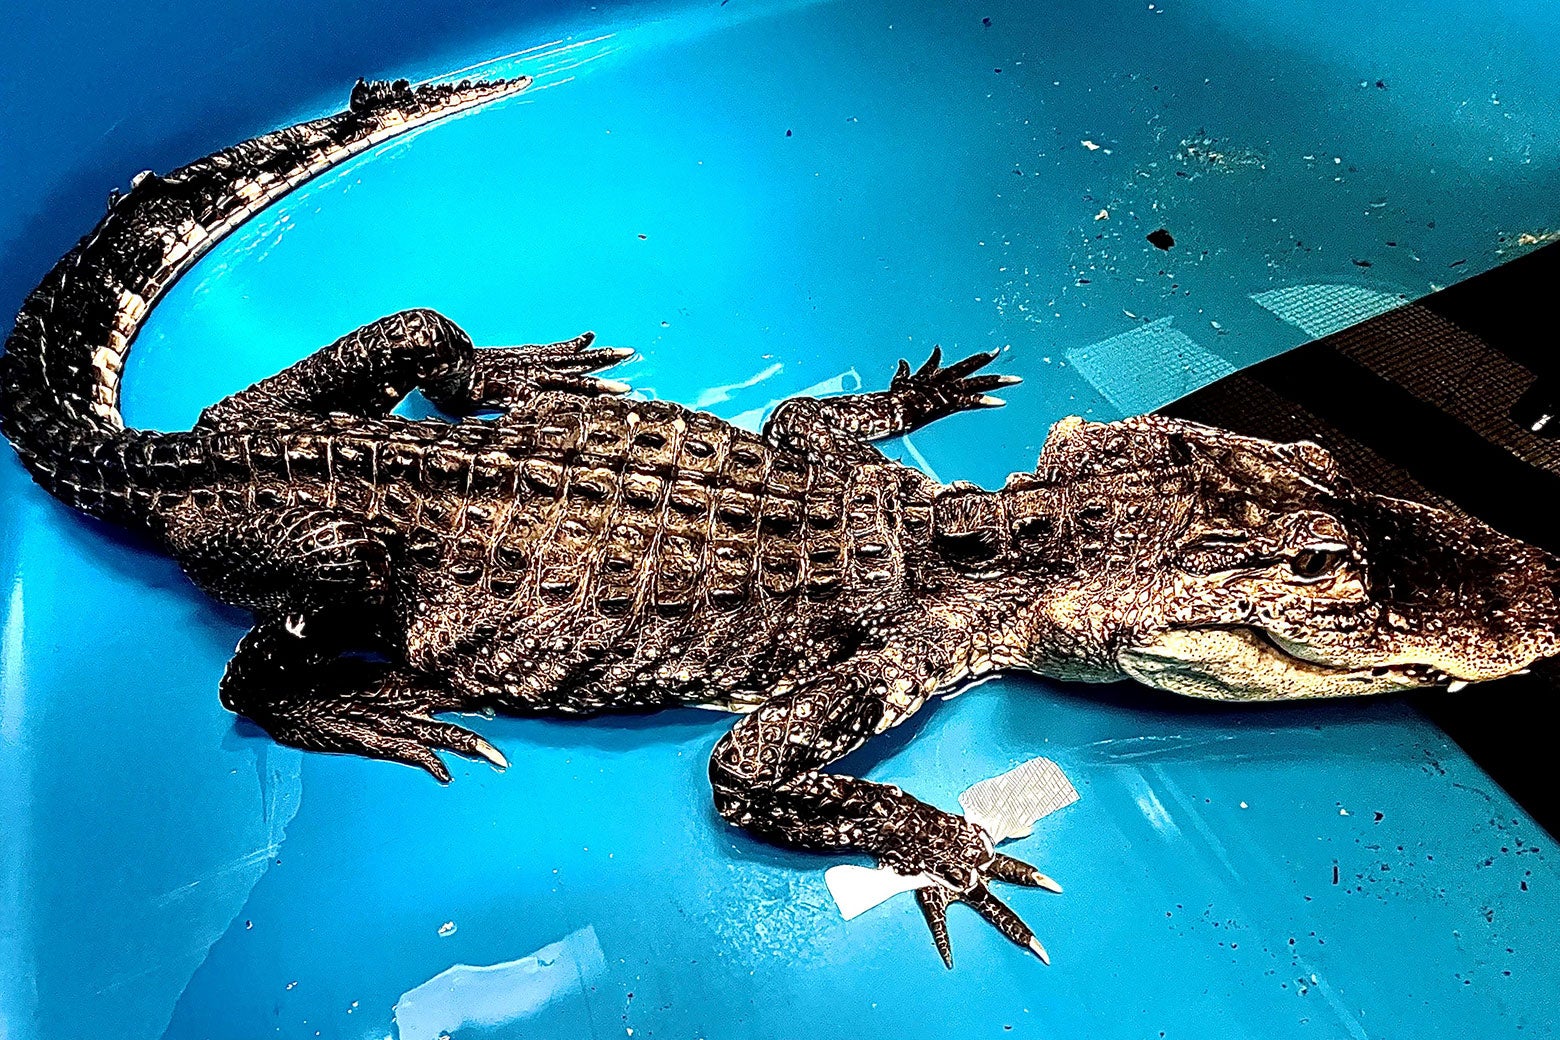 Whats Going on With the Brooklyn Alligator?